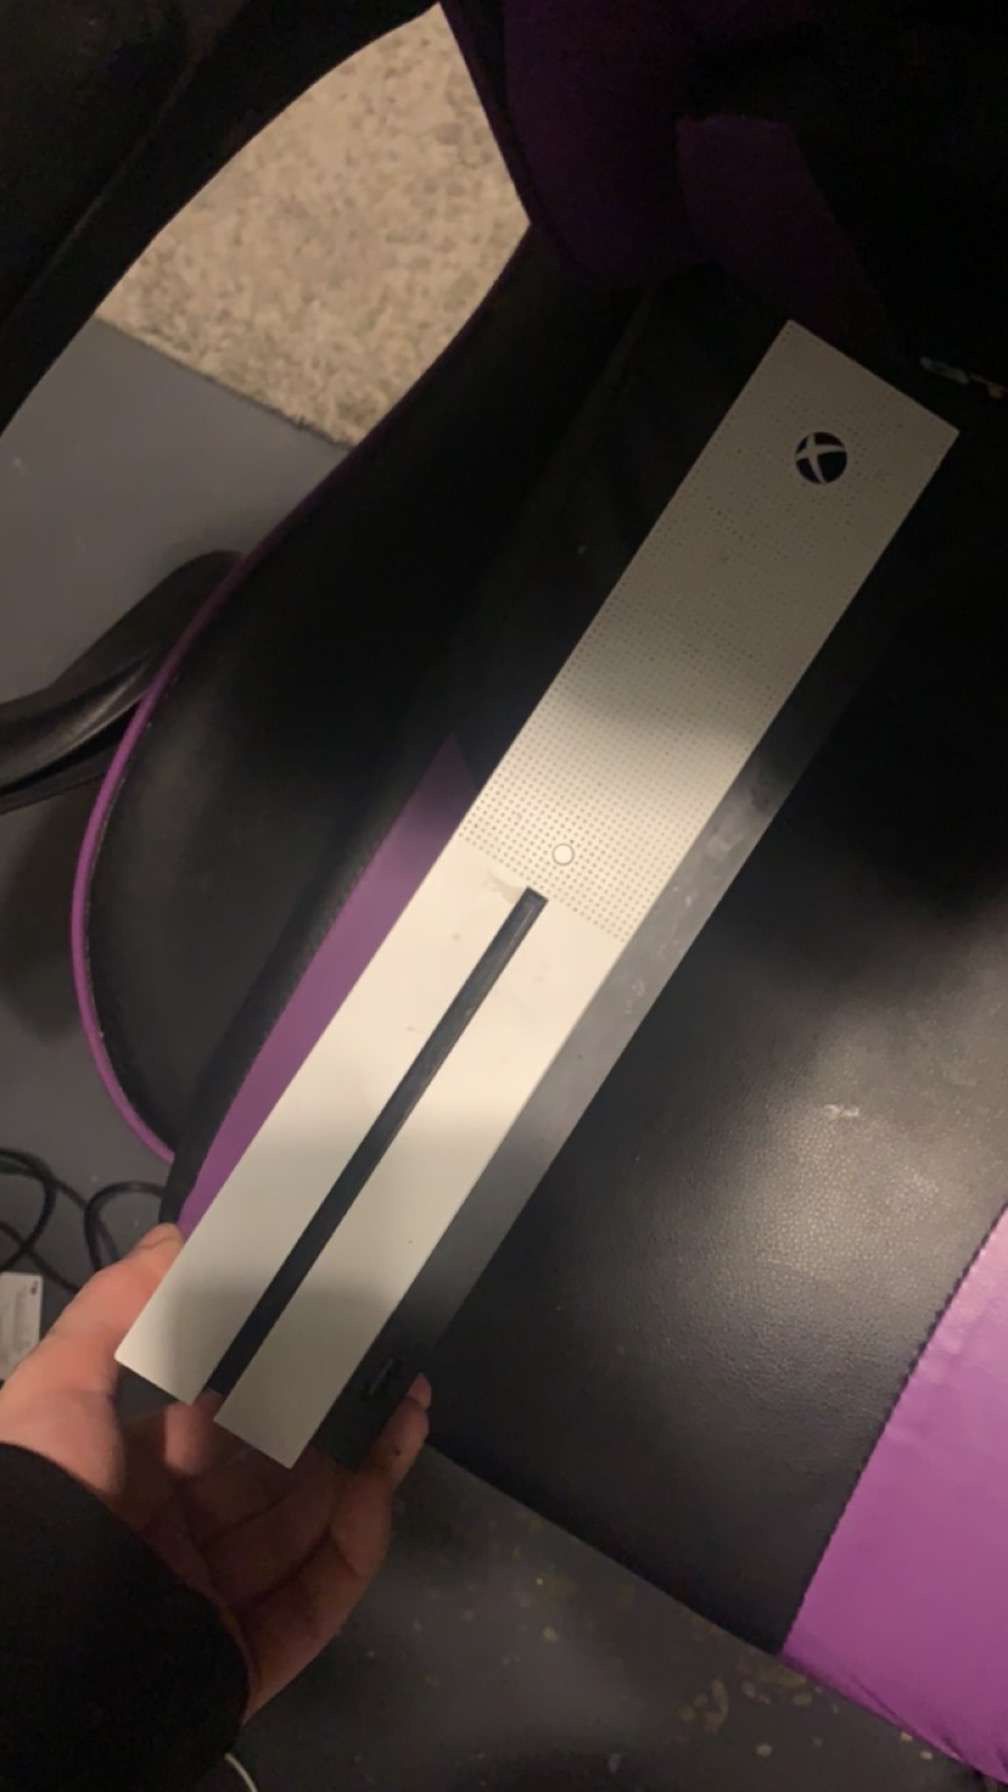 Xbox 1 s, with exclusive wildcat fortnite skin